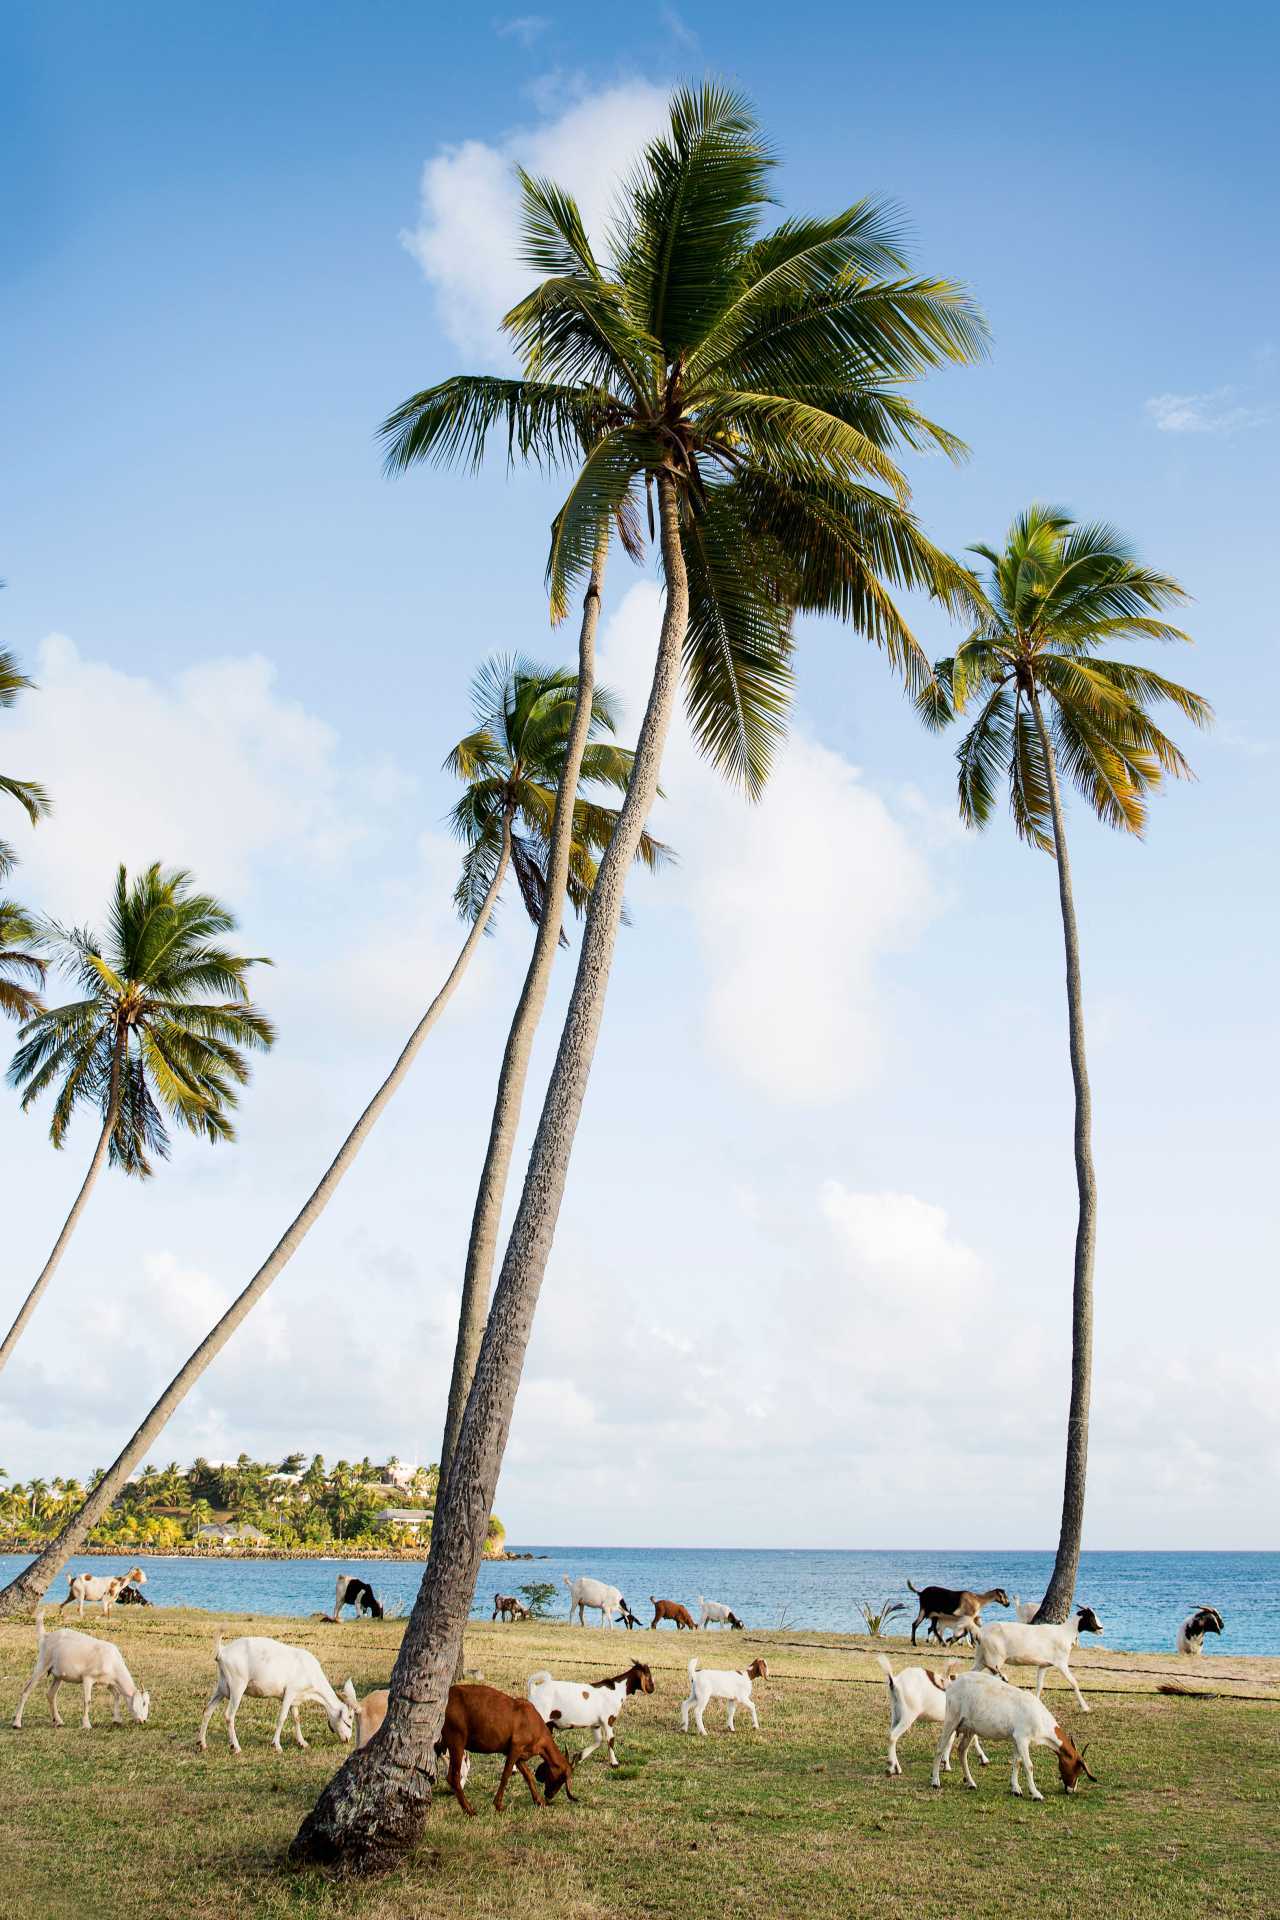 Palm trees and goats on the island of Antigua